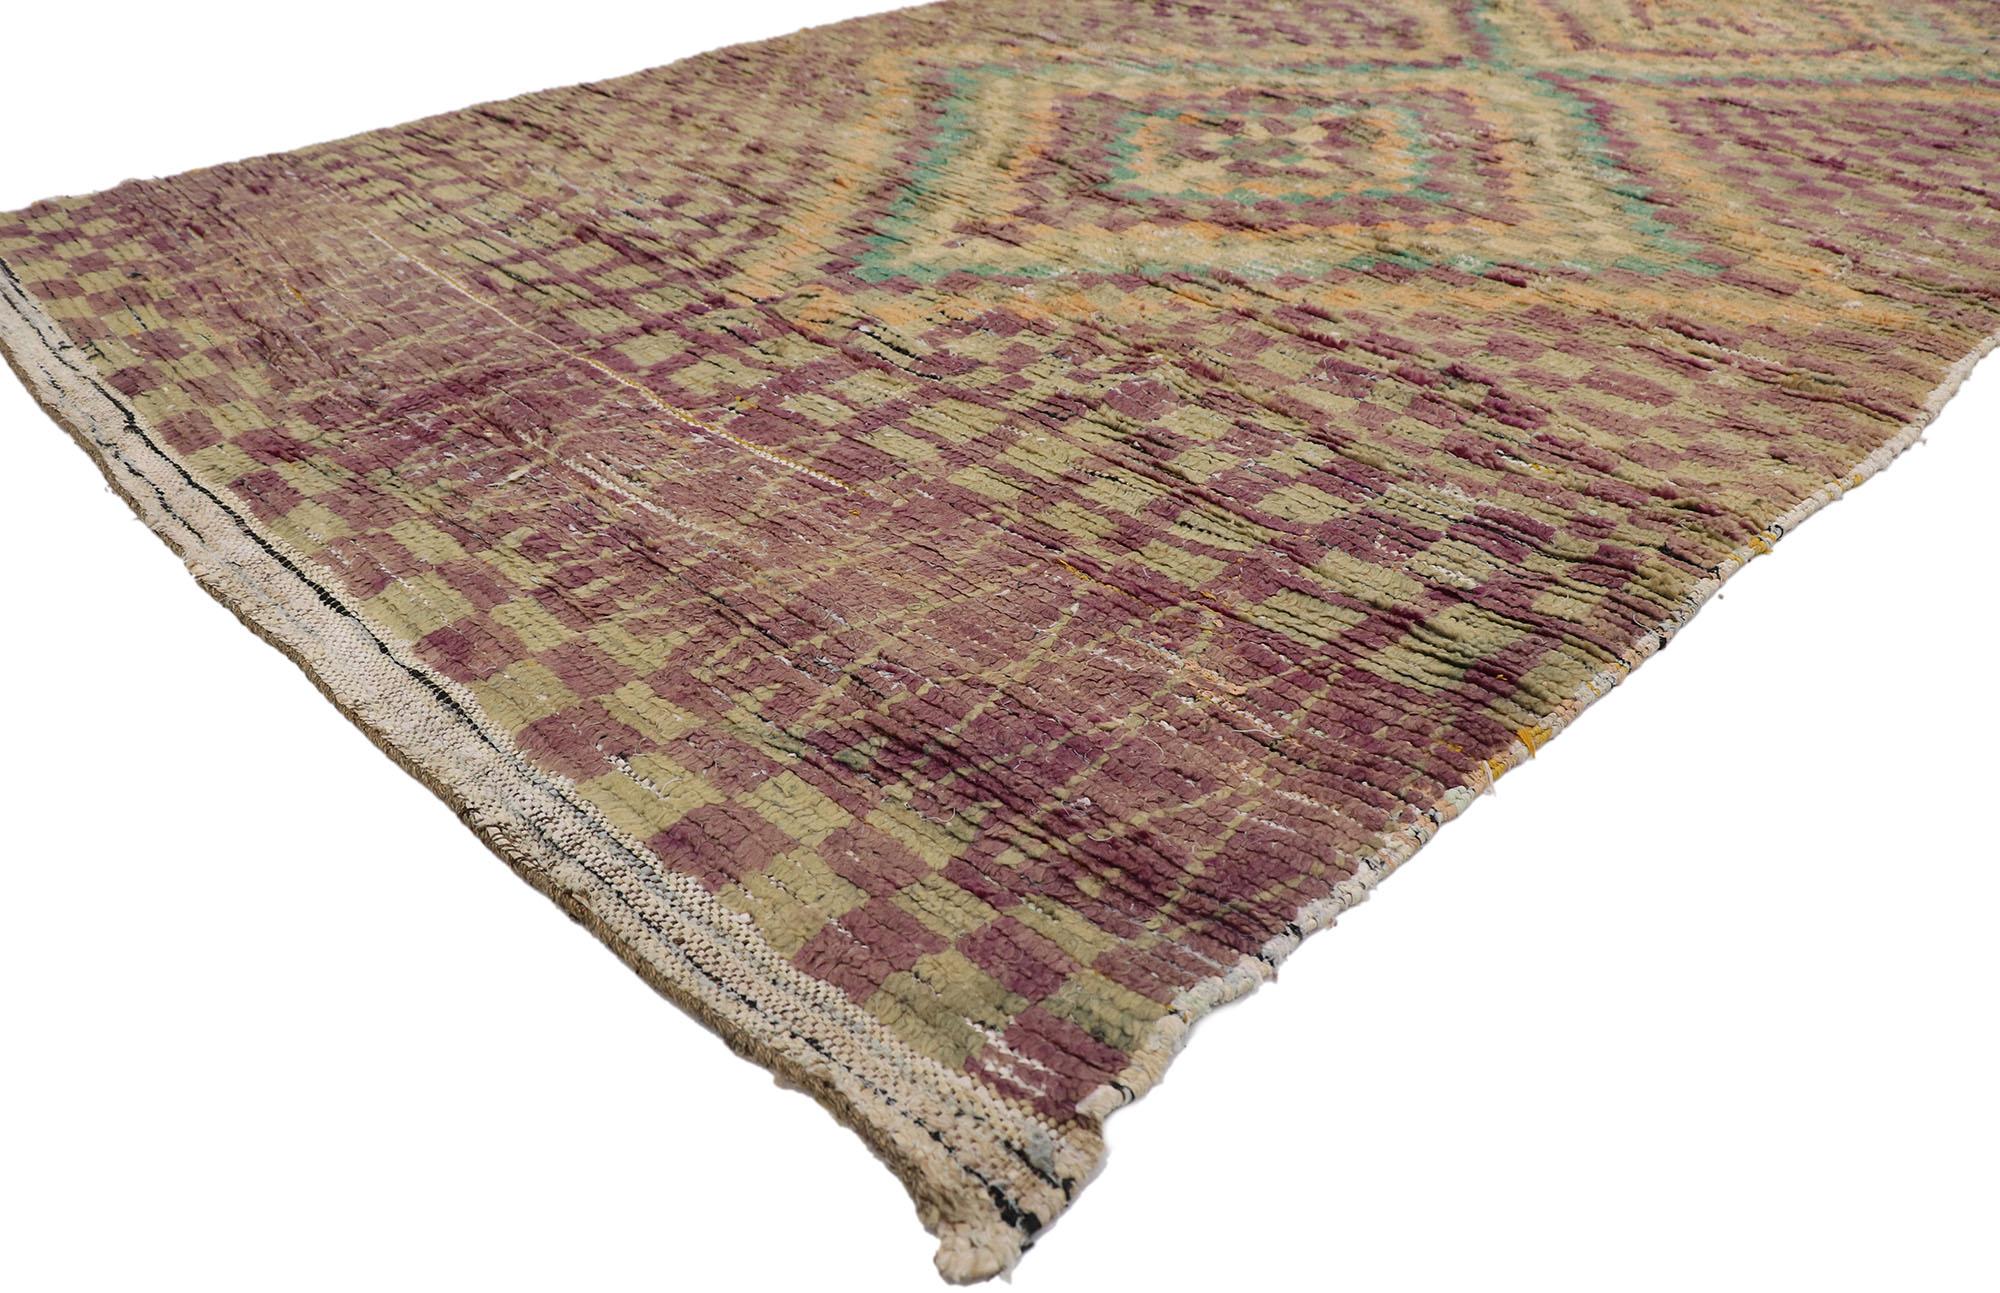 21431 Vintage Berber Moroccan Rug, 05'06 x 09'07. 
Emanating boho chic style amd weathered charm, this hand knotted wool vintage Berber Moroccan rug is a captivating vision of woven beauty. The eye-catching checkered pattern and soft pastel colors